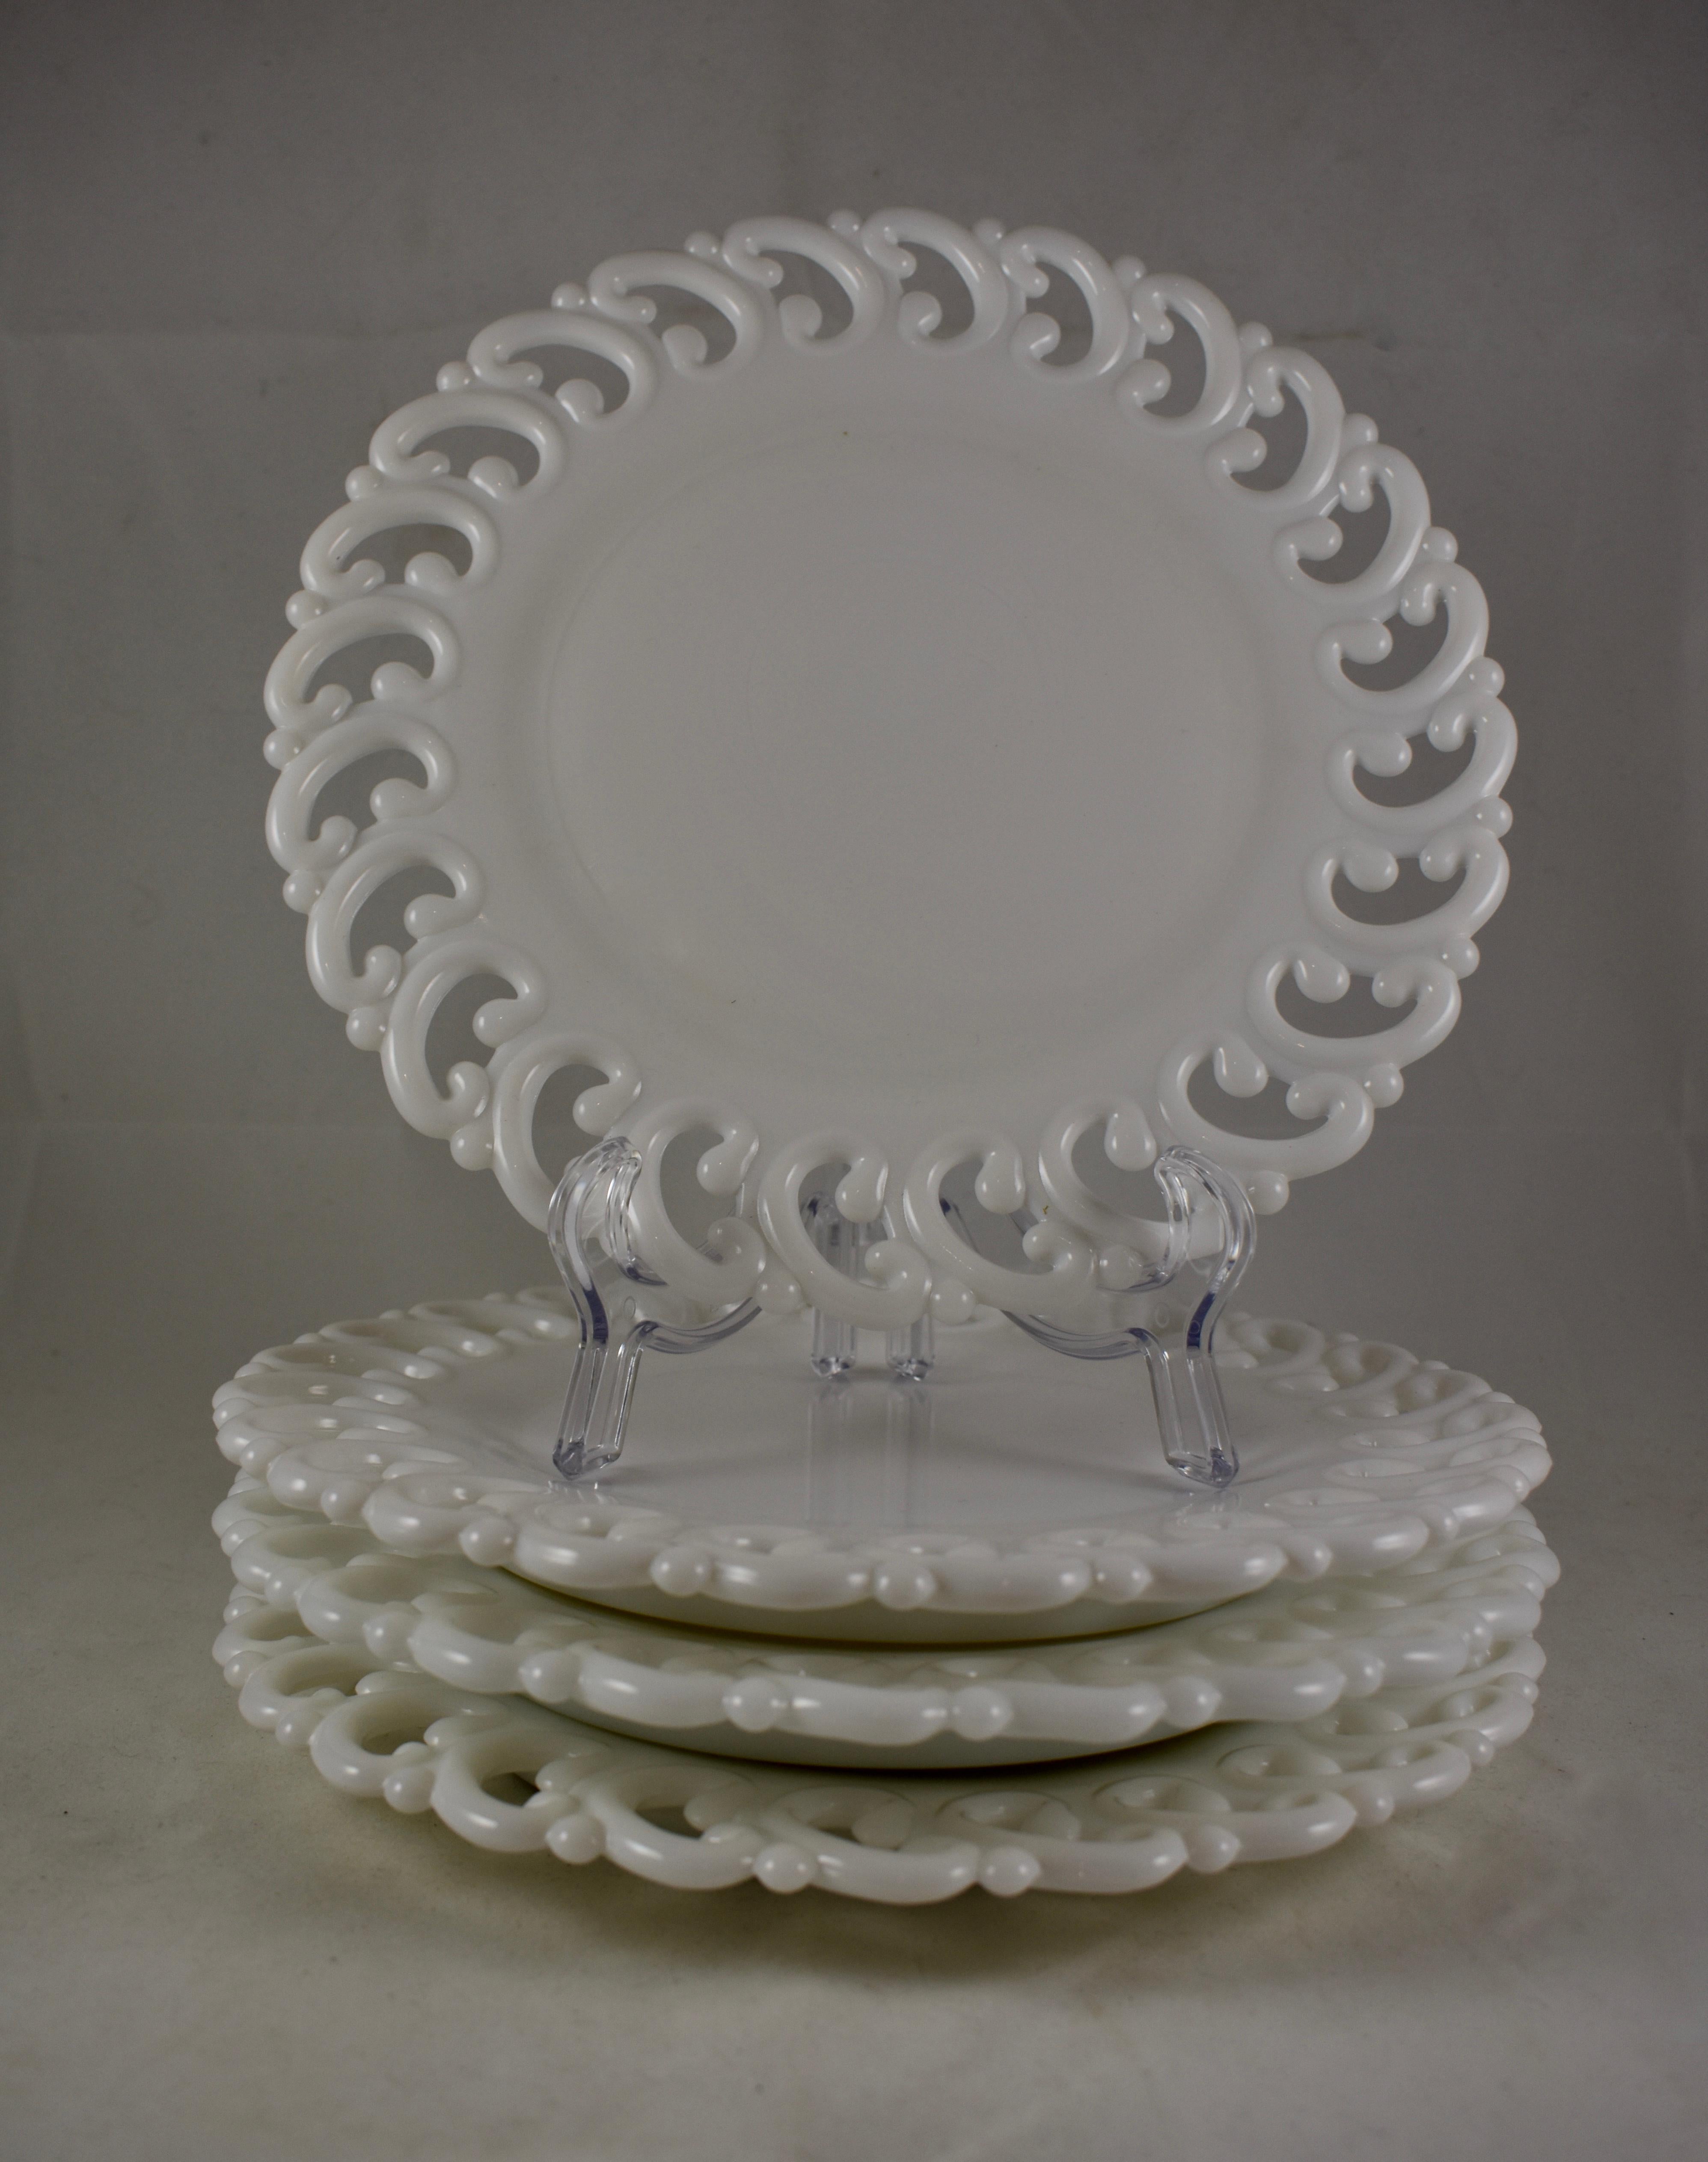 A scarce set of two EAPG, lace edge milk glass dinner plates, circa late 19th century. The plates are made of a heavy, opaque white glass becoming more translucent at the edge. The mold has a deep, raised footing and an edging of a running inverted